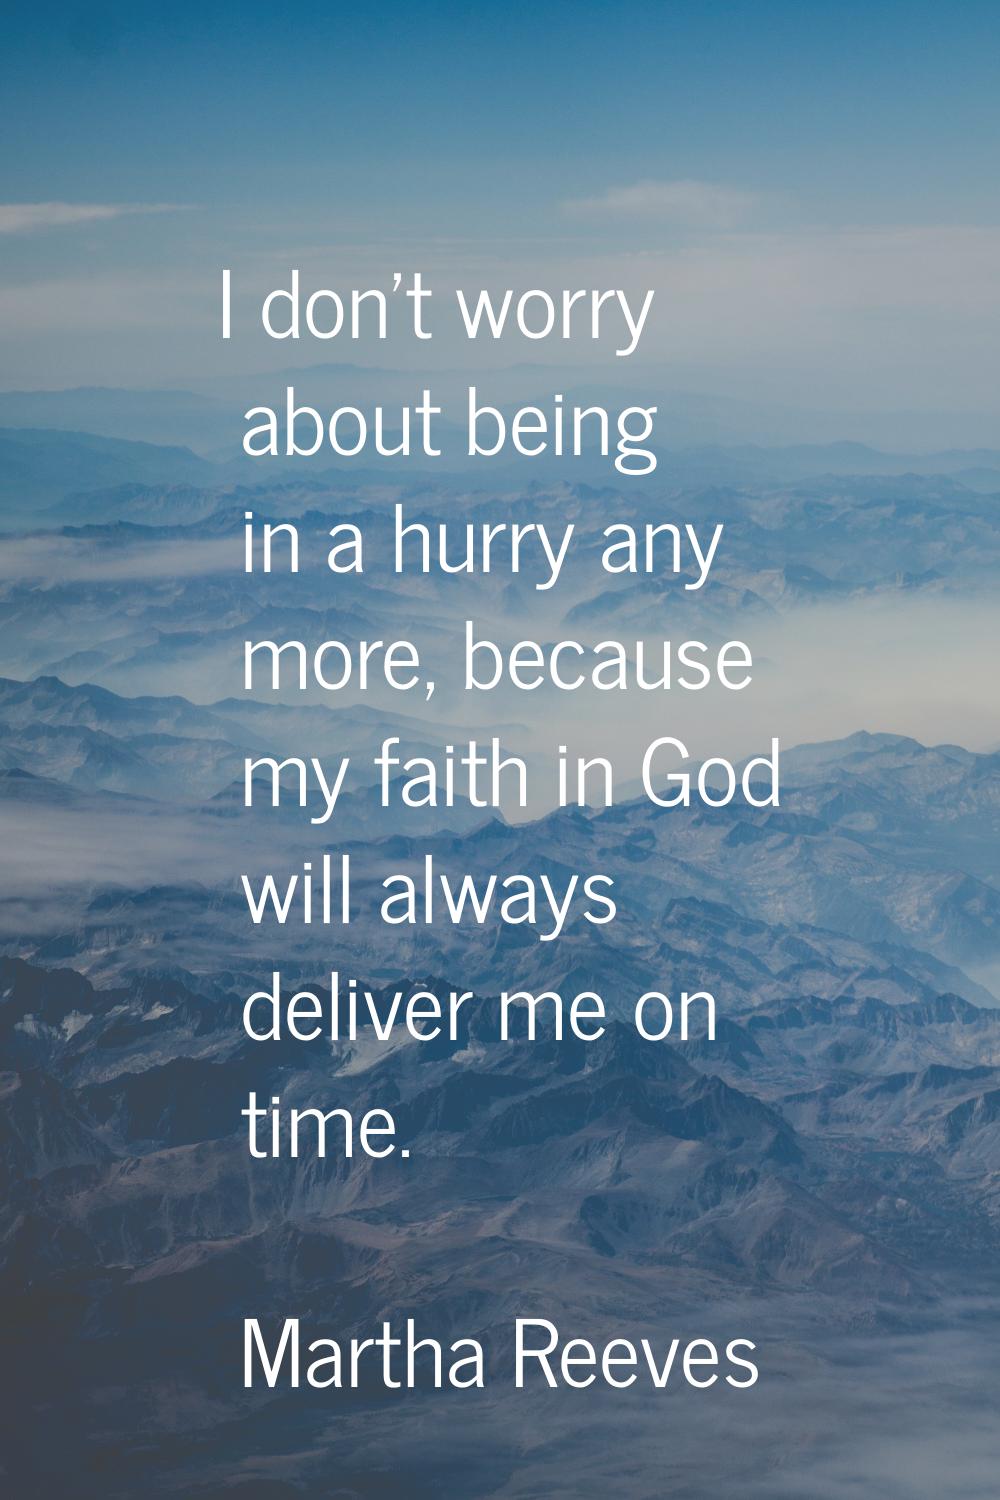 I don't worry about being in a hurry any more, because my faith in God will always deliver me on ti